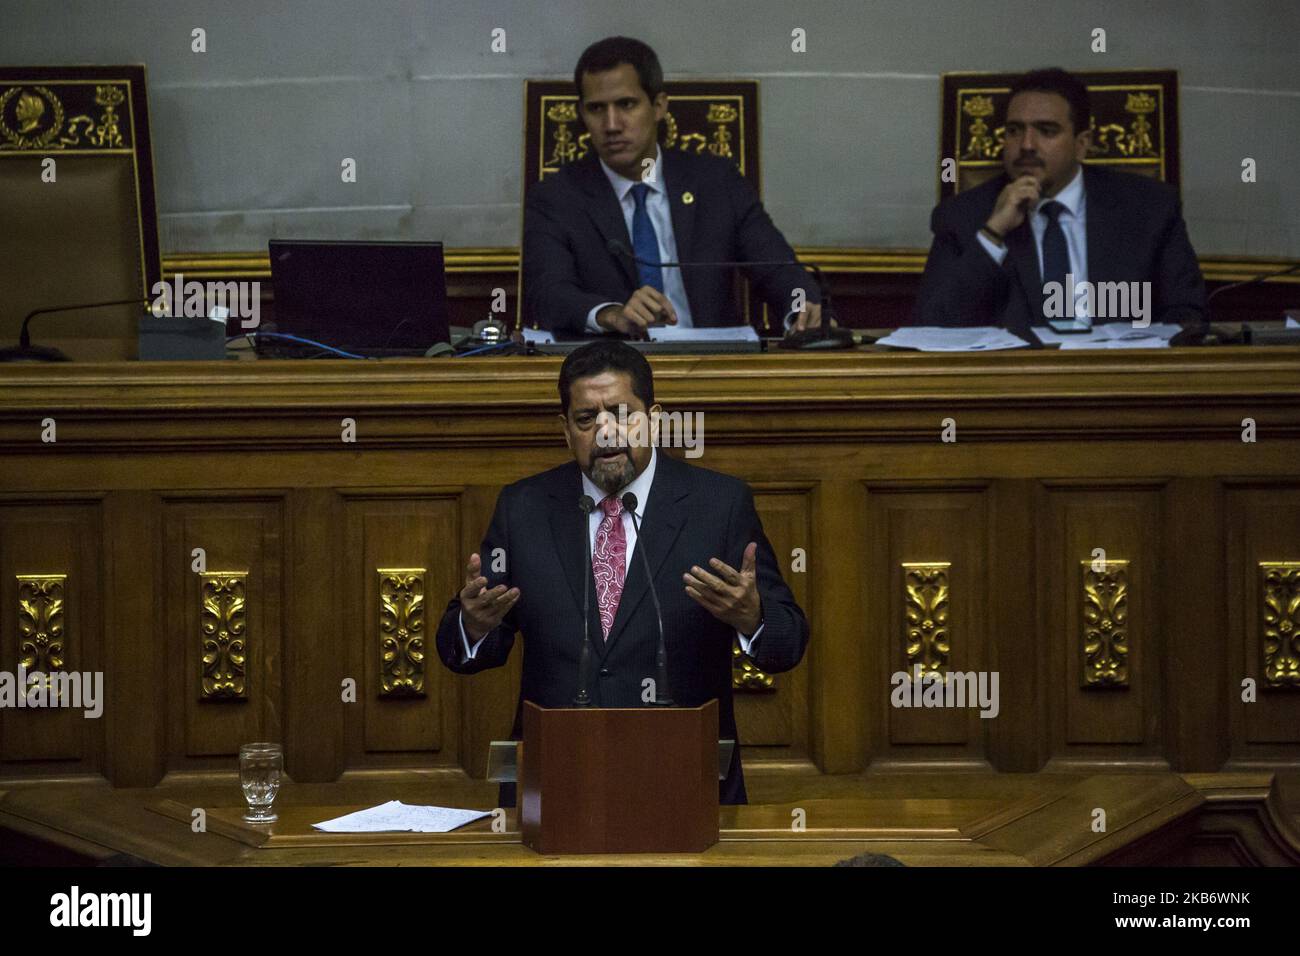 National Assembly vice-president Edgar Zambrano speaks during a session of the National Assembly with the presence of pro-government deputies. Edgar Zambrano was released from jail last September 17. in Caracas on September 24, 2019. (Photo by Rafael Briceno Sierralta/NurPhoto) Stock Photo